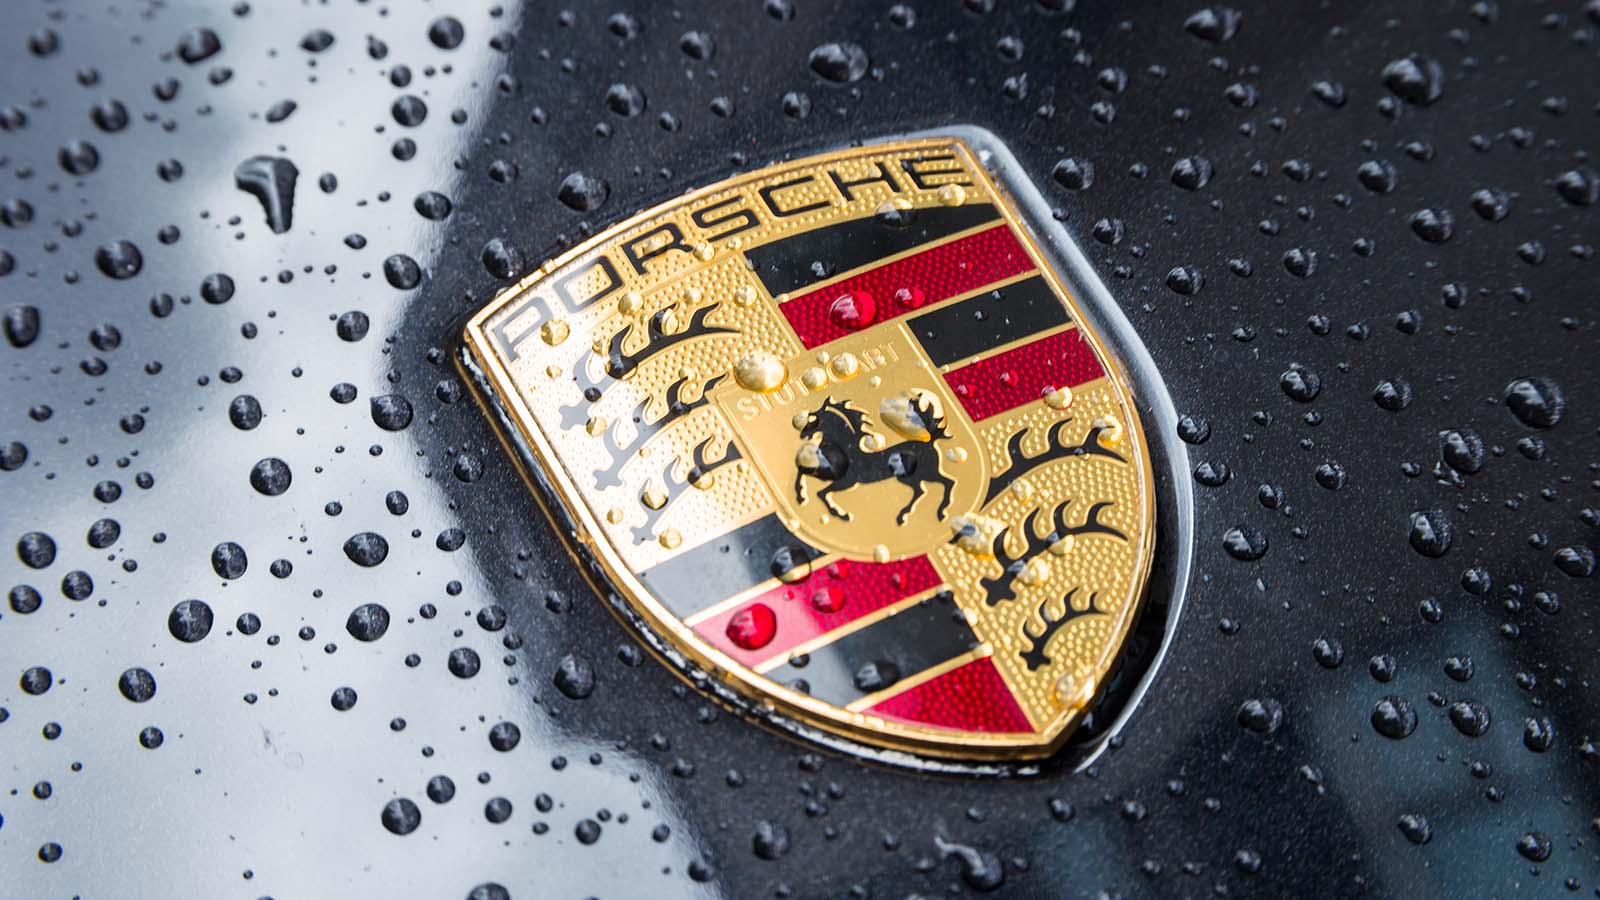 The Porsche logo on a black vehicle representing its upcomcing IPO.